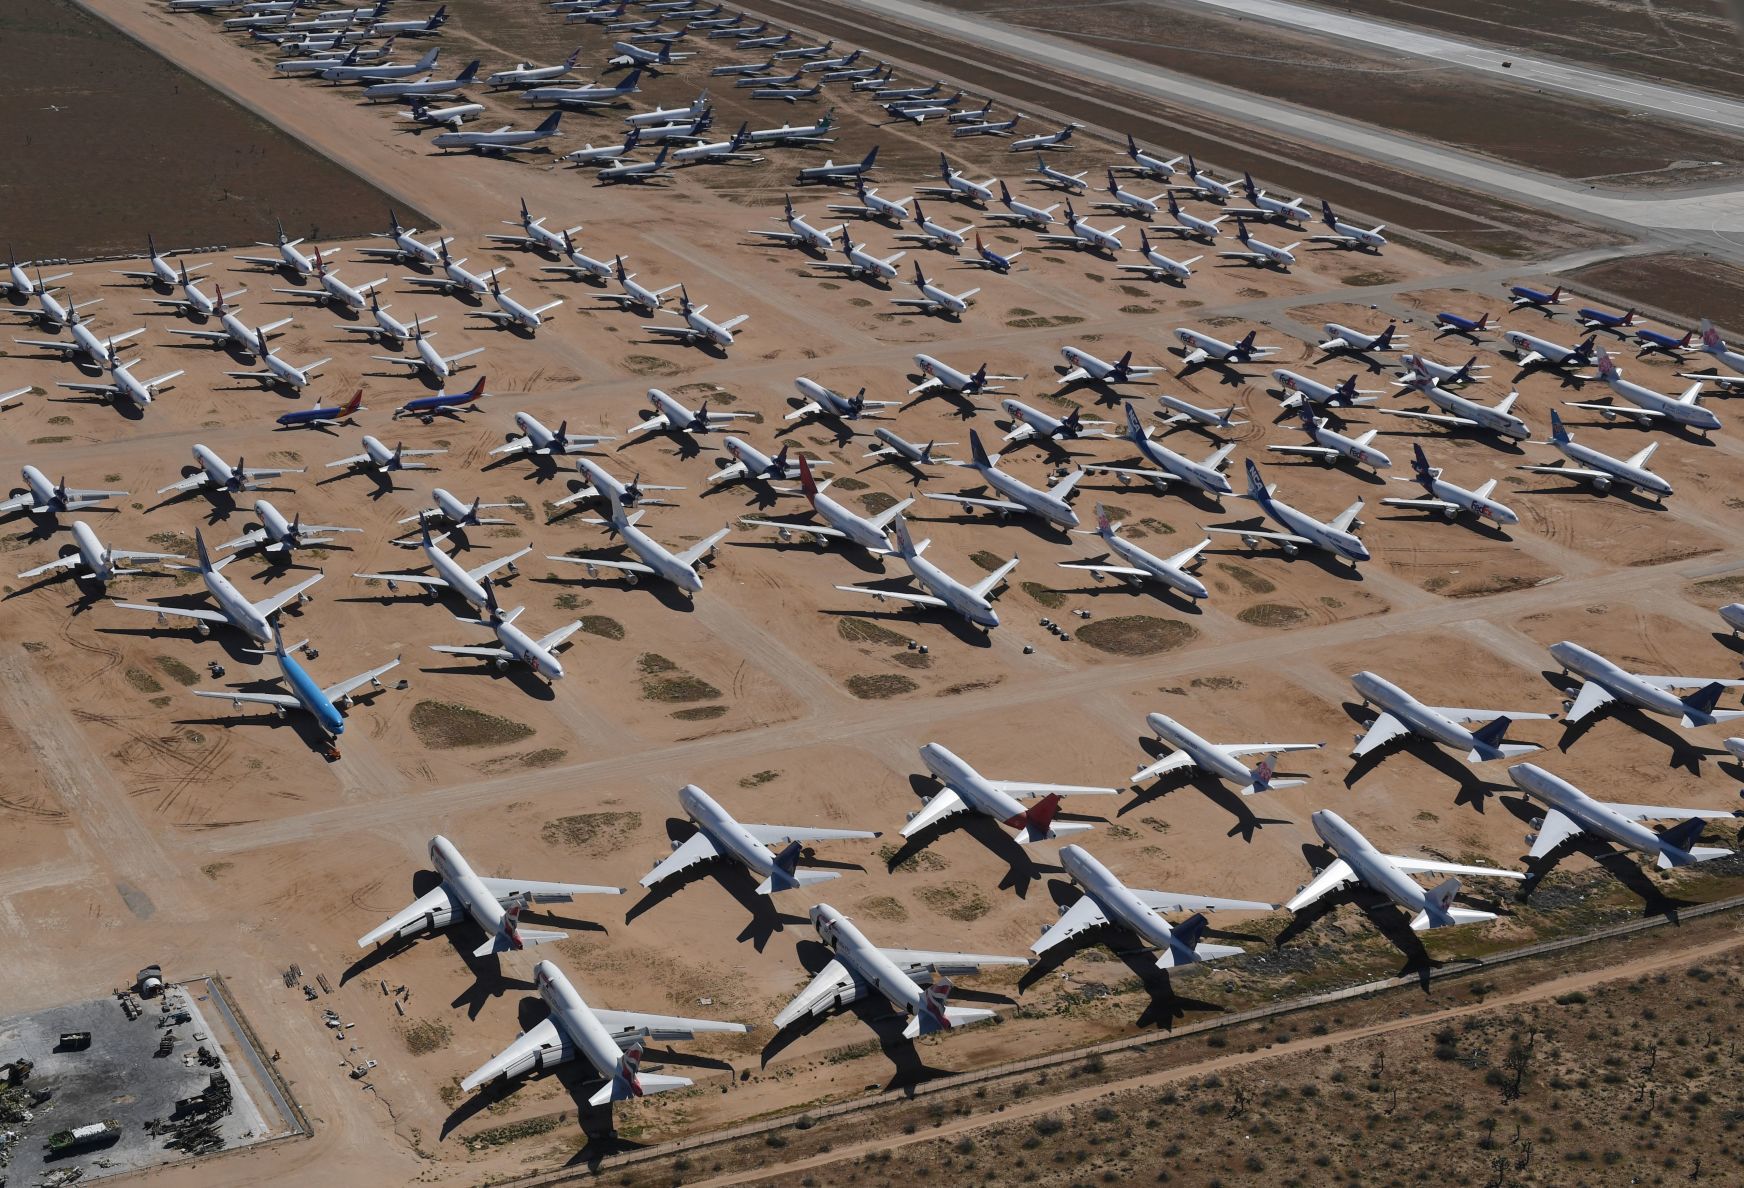 Southern California Logistics Airport at Victorville, CA